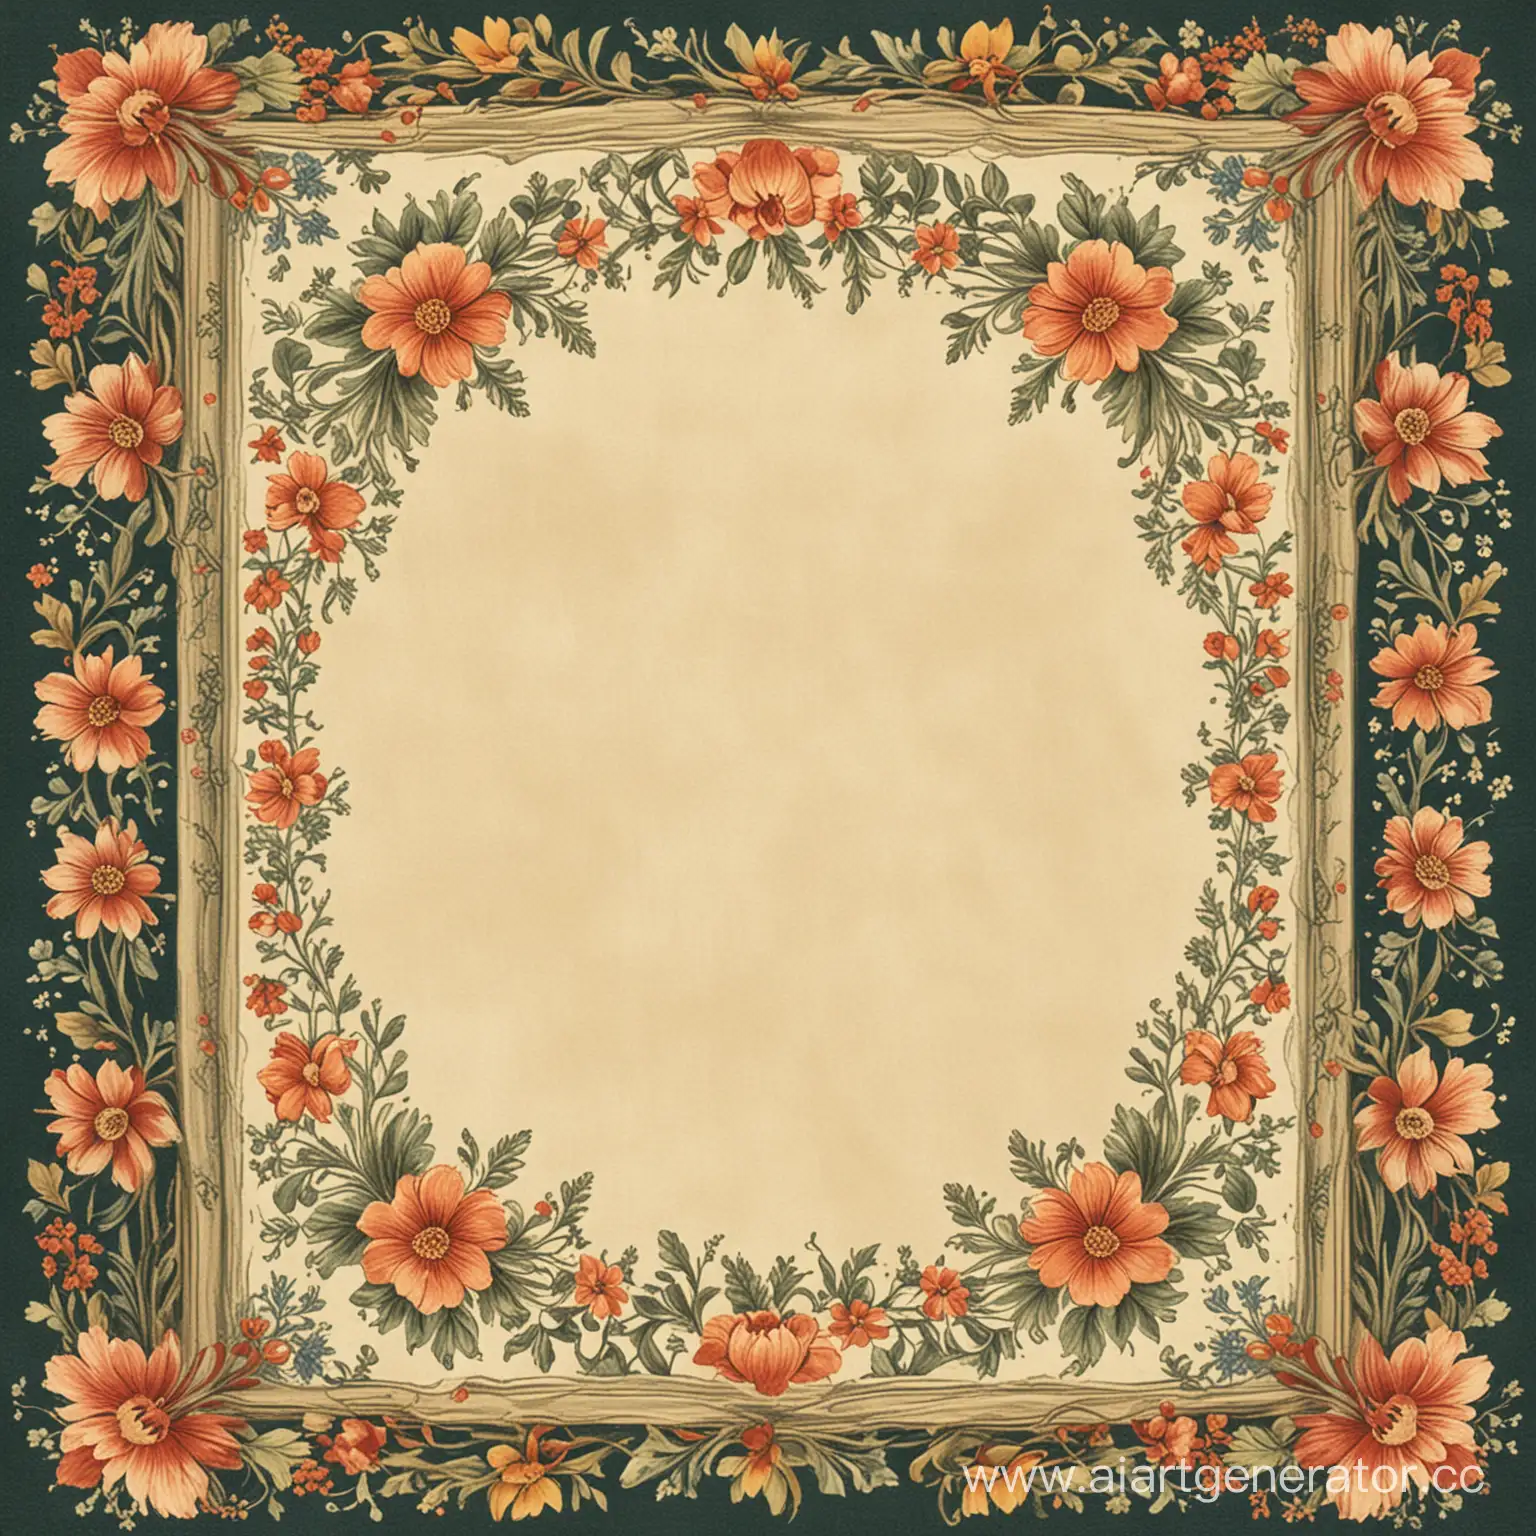 old looking book cover, flowery patterned frame, no people, no text, jane ayr style
